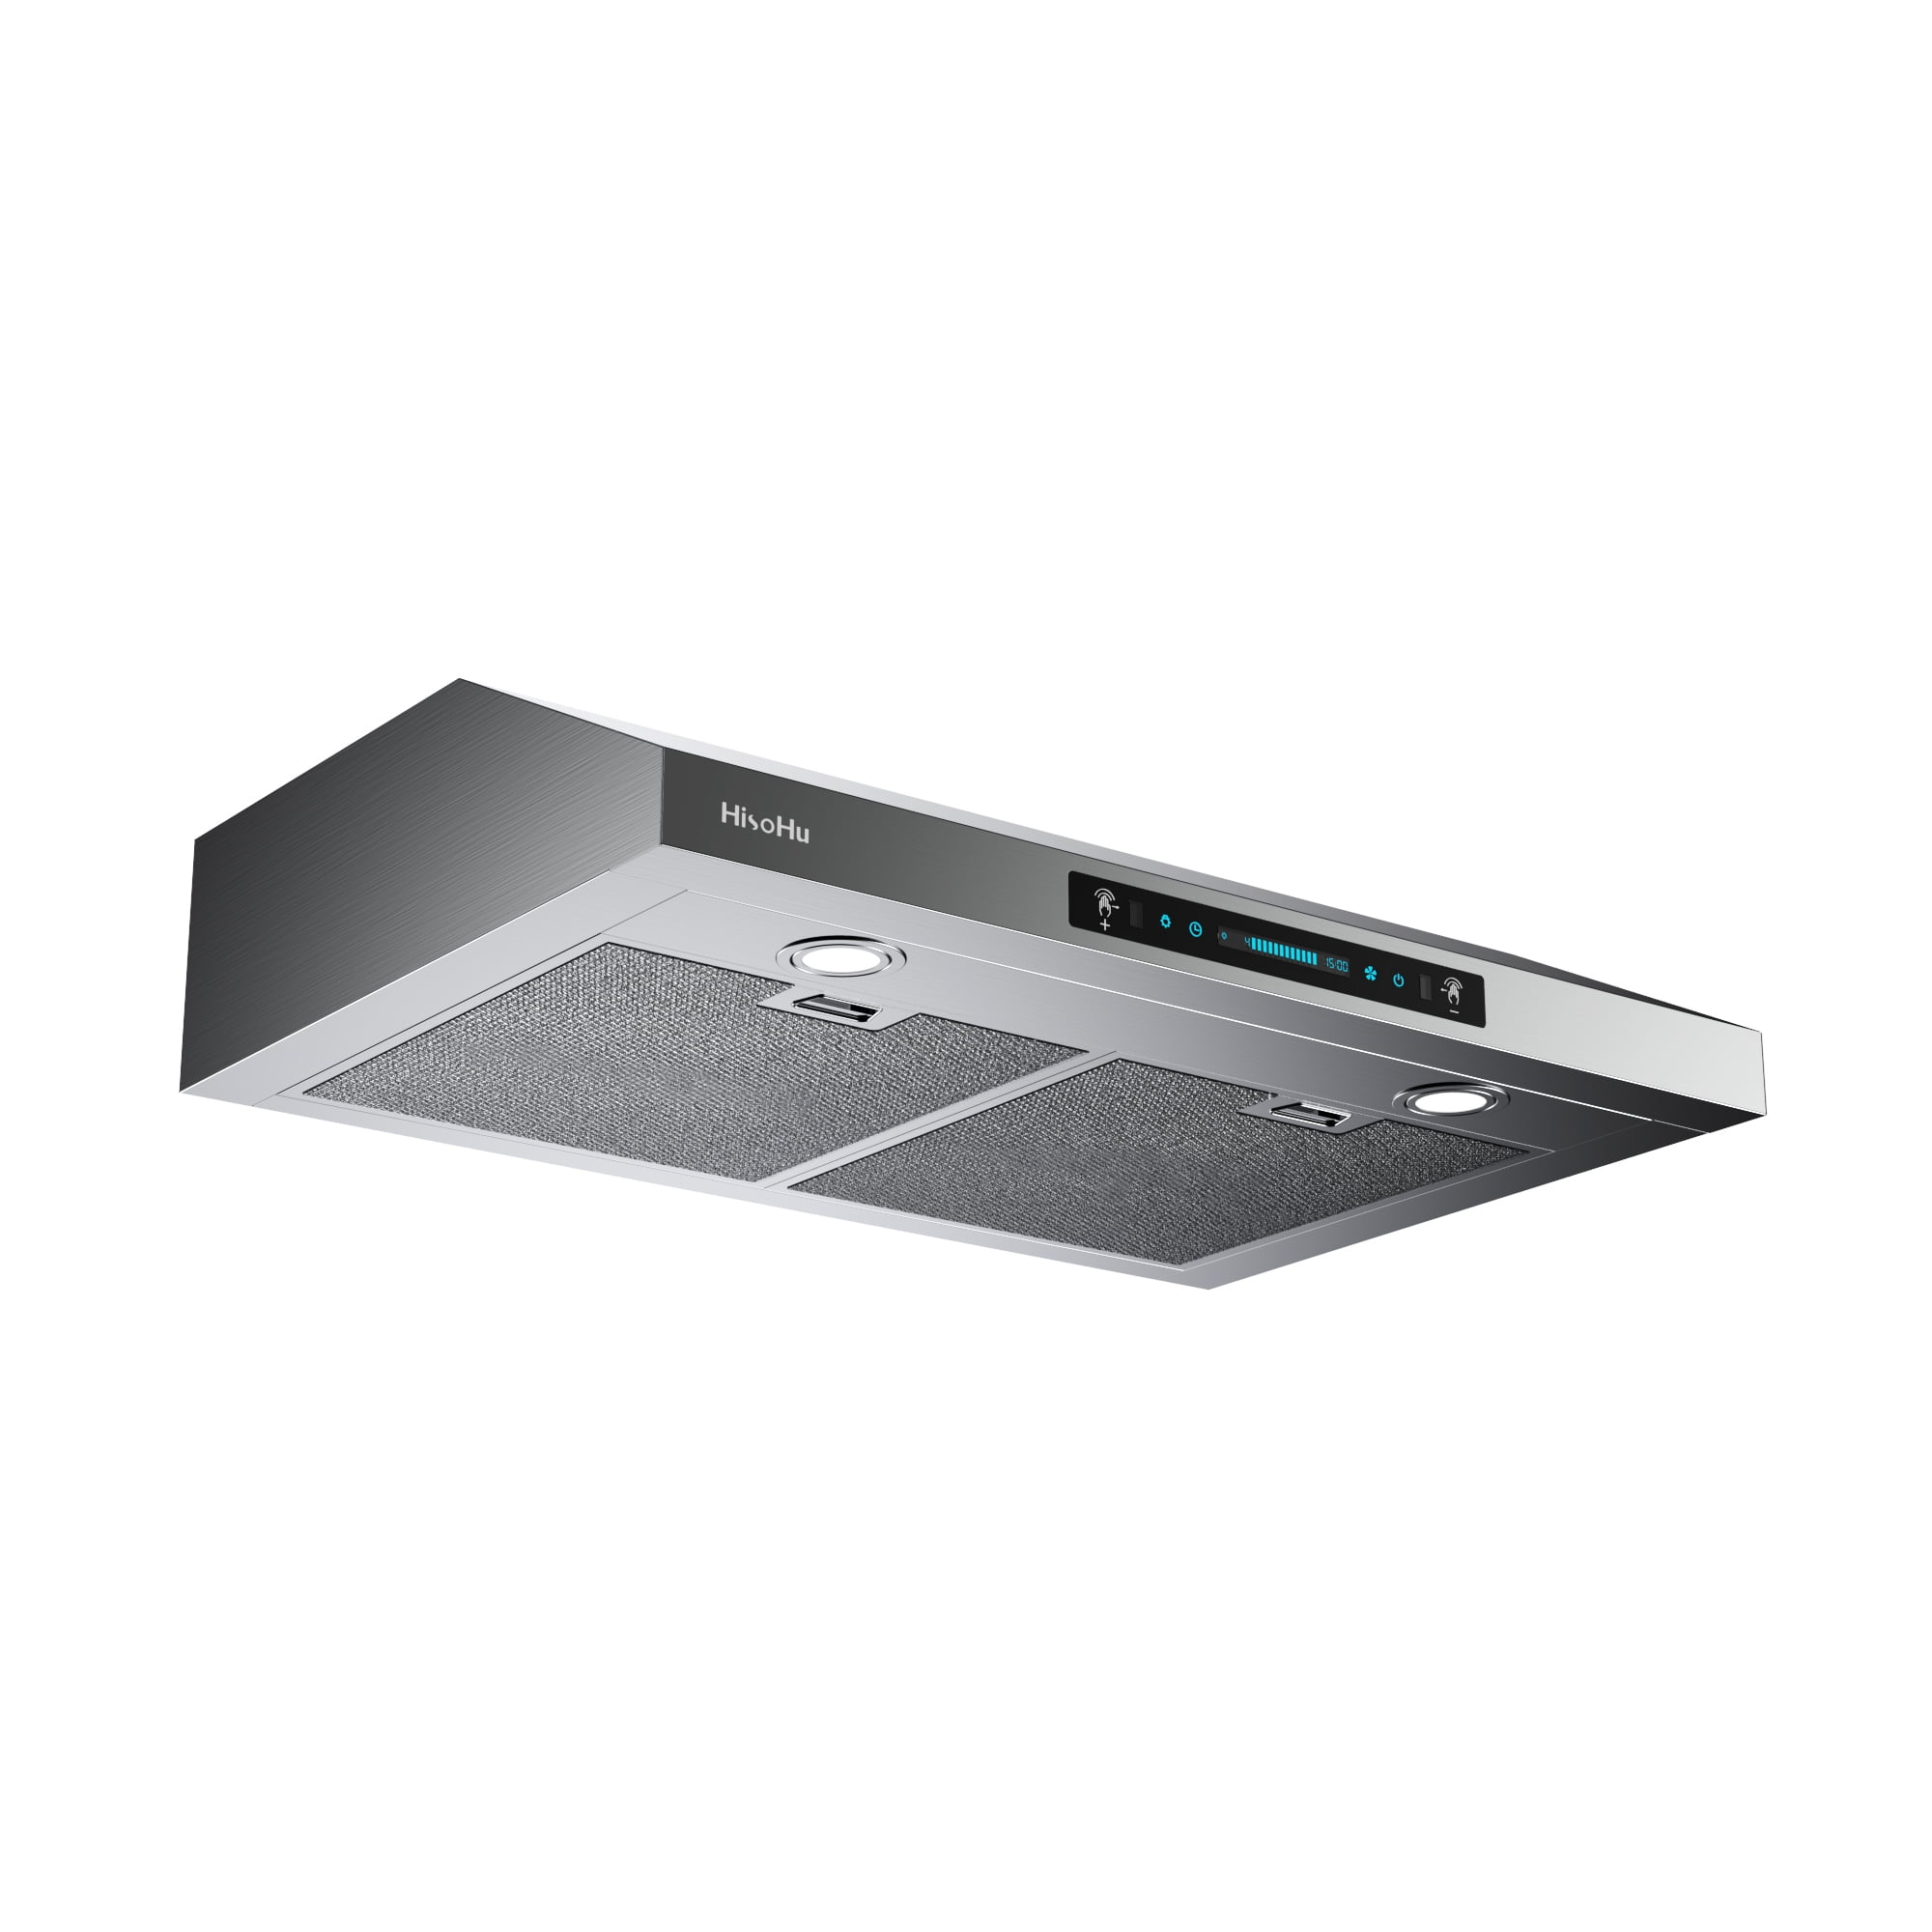 IKTCH 30 inch Insert Range Hood, 900 CFM Stainless Steel Kitchen Vent Hood,  Ducted/Ductless Convertible Built-in Range Hood with 4 Speed Gesture